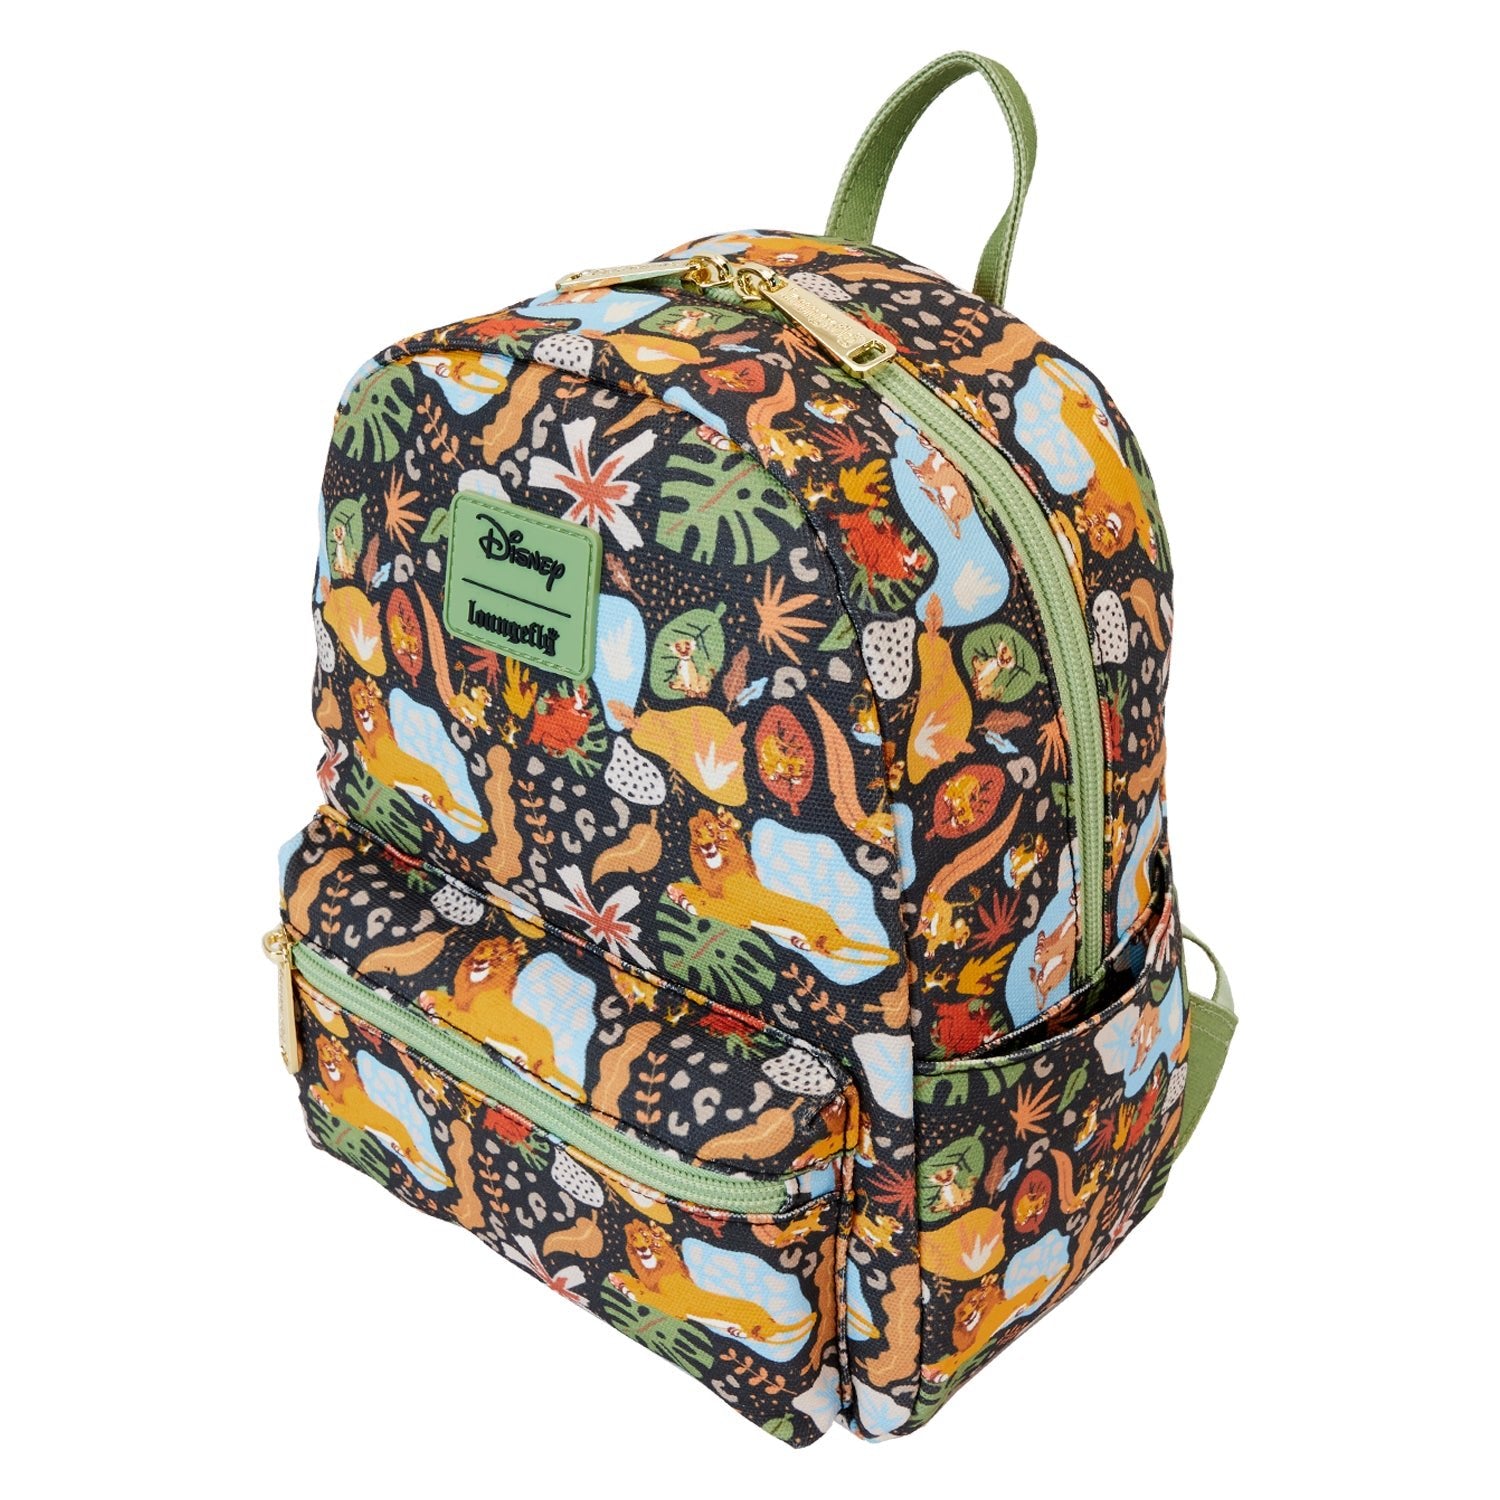 Loungefly x Disney Lion King 30th Anniversary Silhouette AOP Nylon Backpack - GeekCore